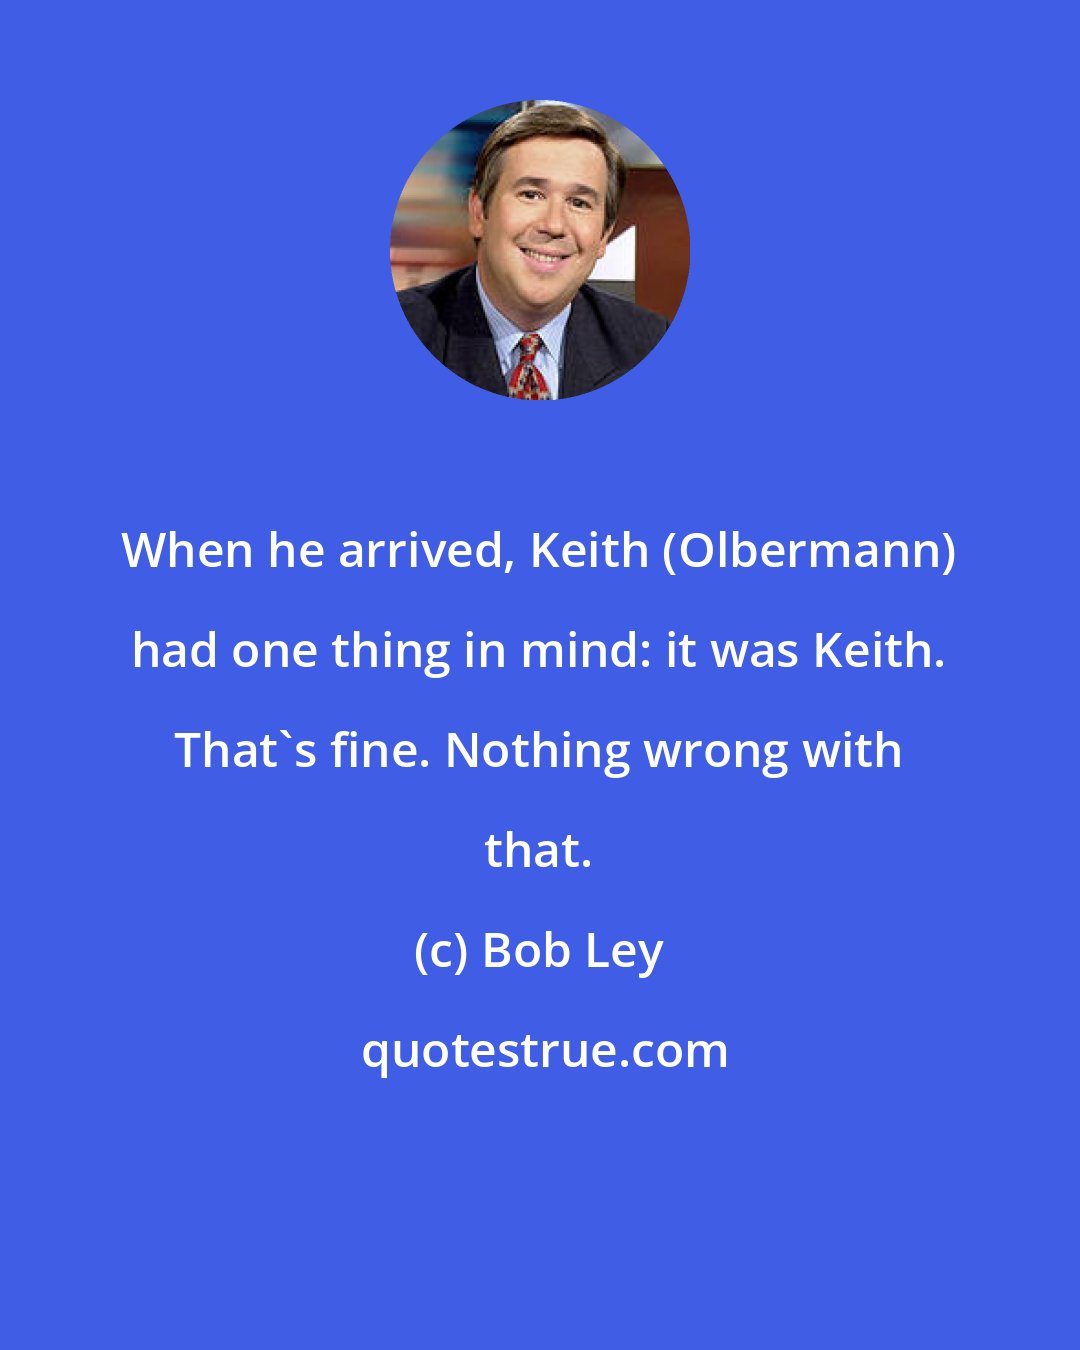 Bob Ley: When he arrived, Keith (Olbermann) had one thing in mind: it was Keith. That's fine. Nothing wrong with that.